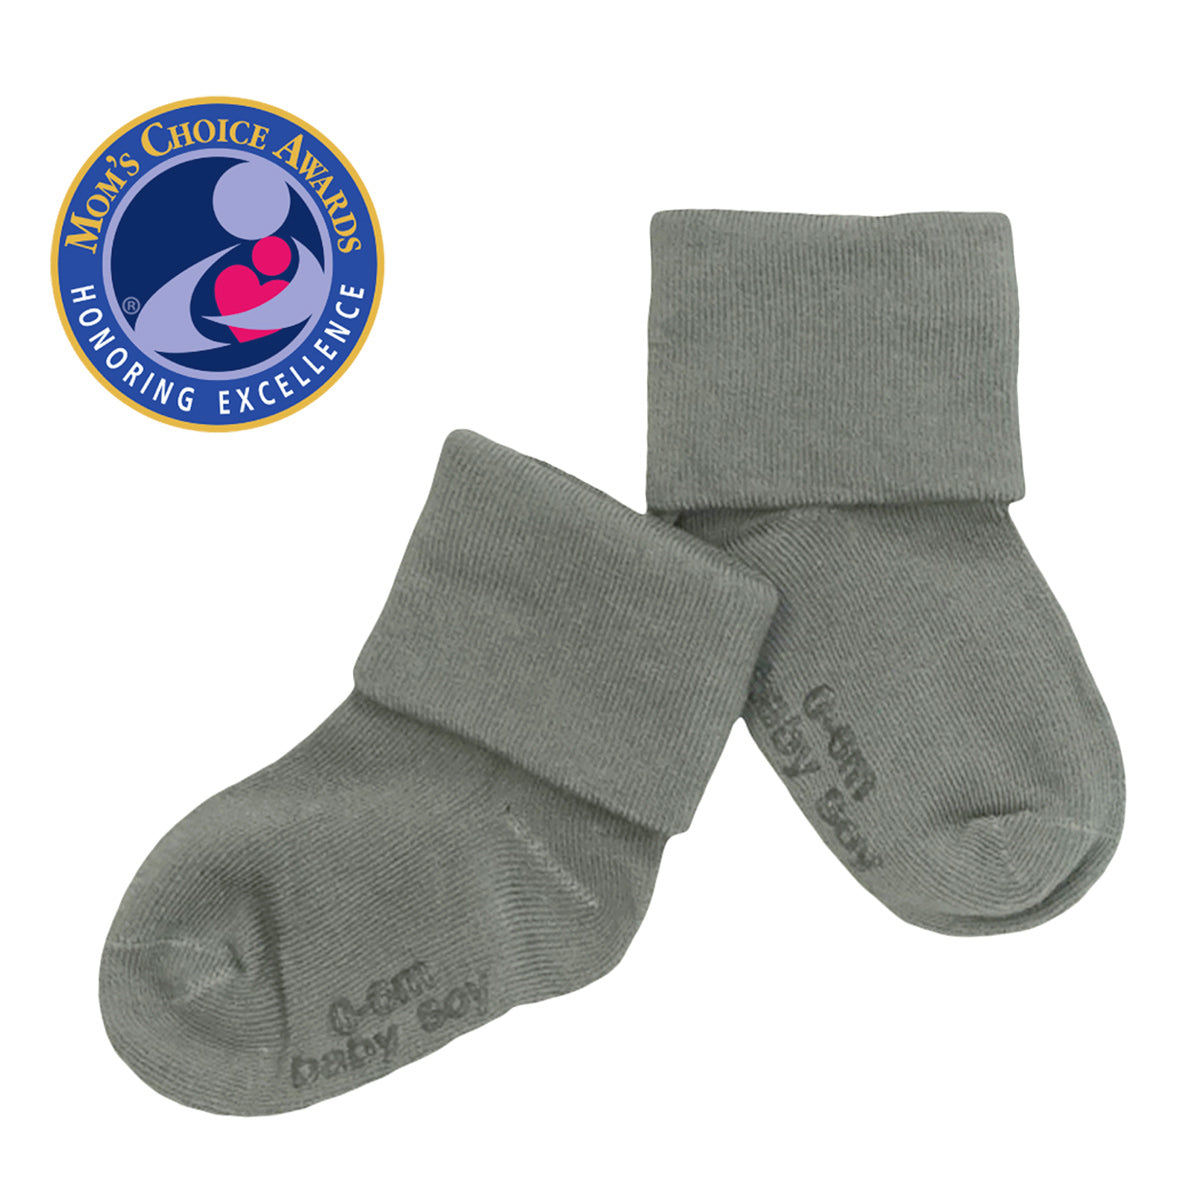 Babysoy Baby Socks Solid Colors That Stay-On with Grips Thunder / 12-24 Months